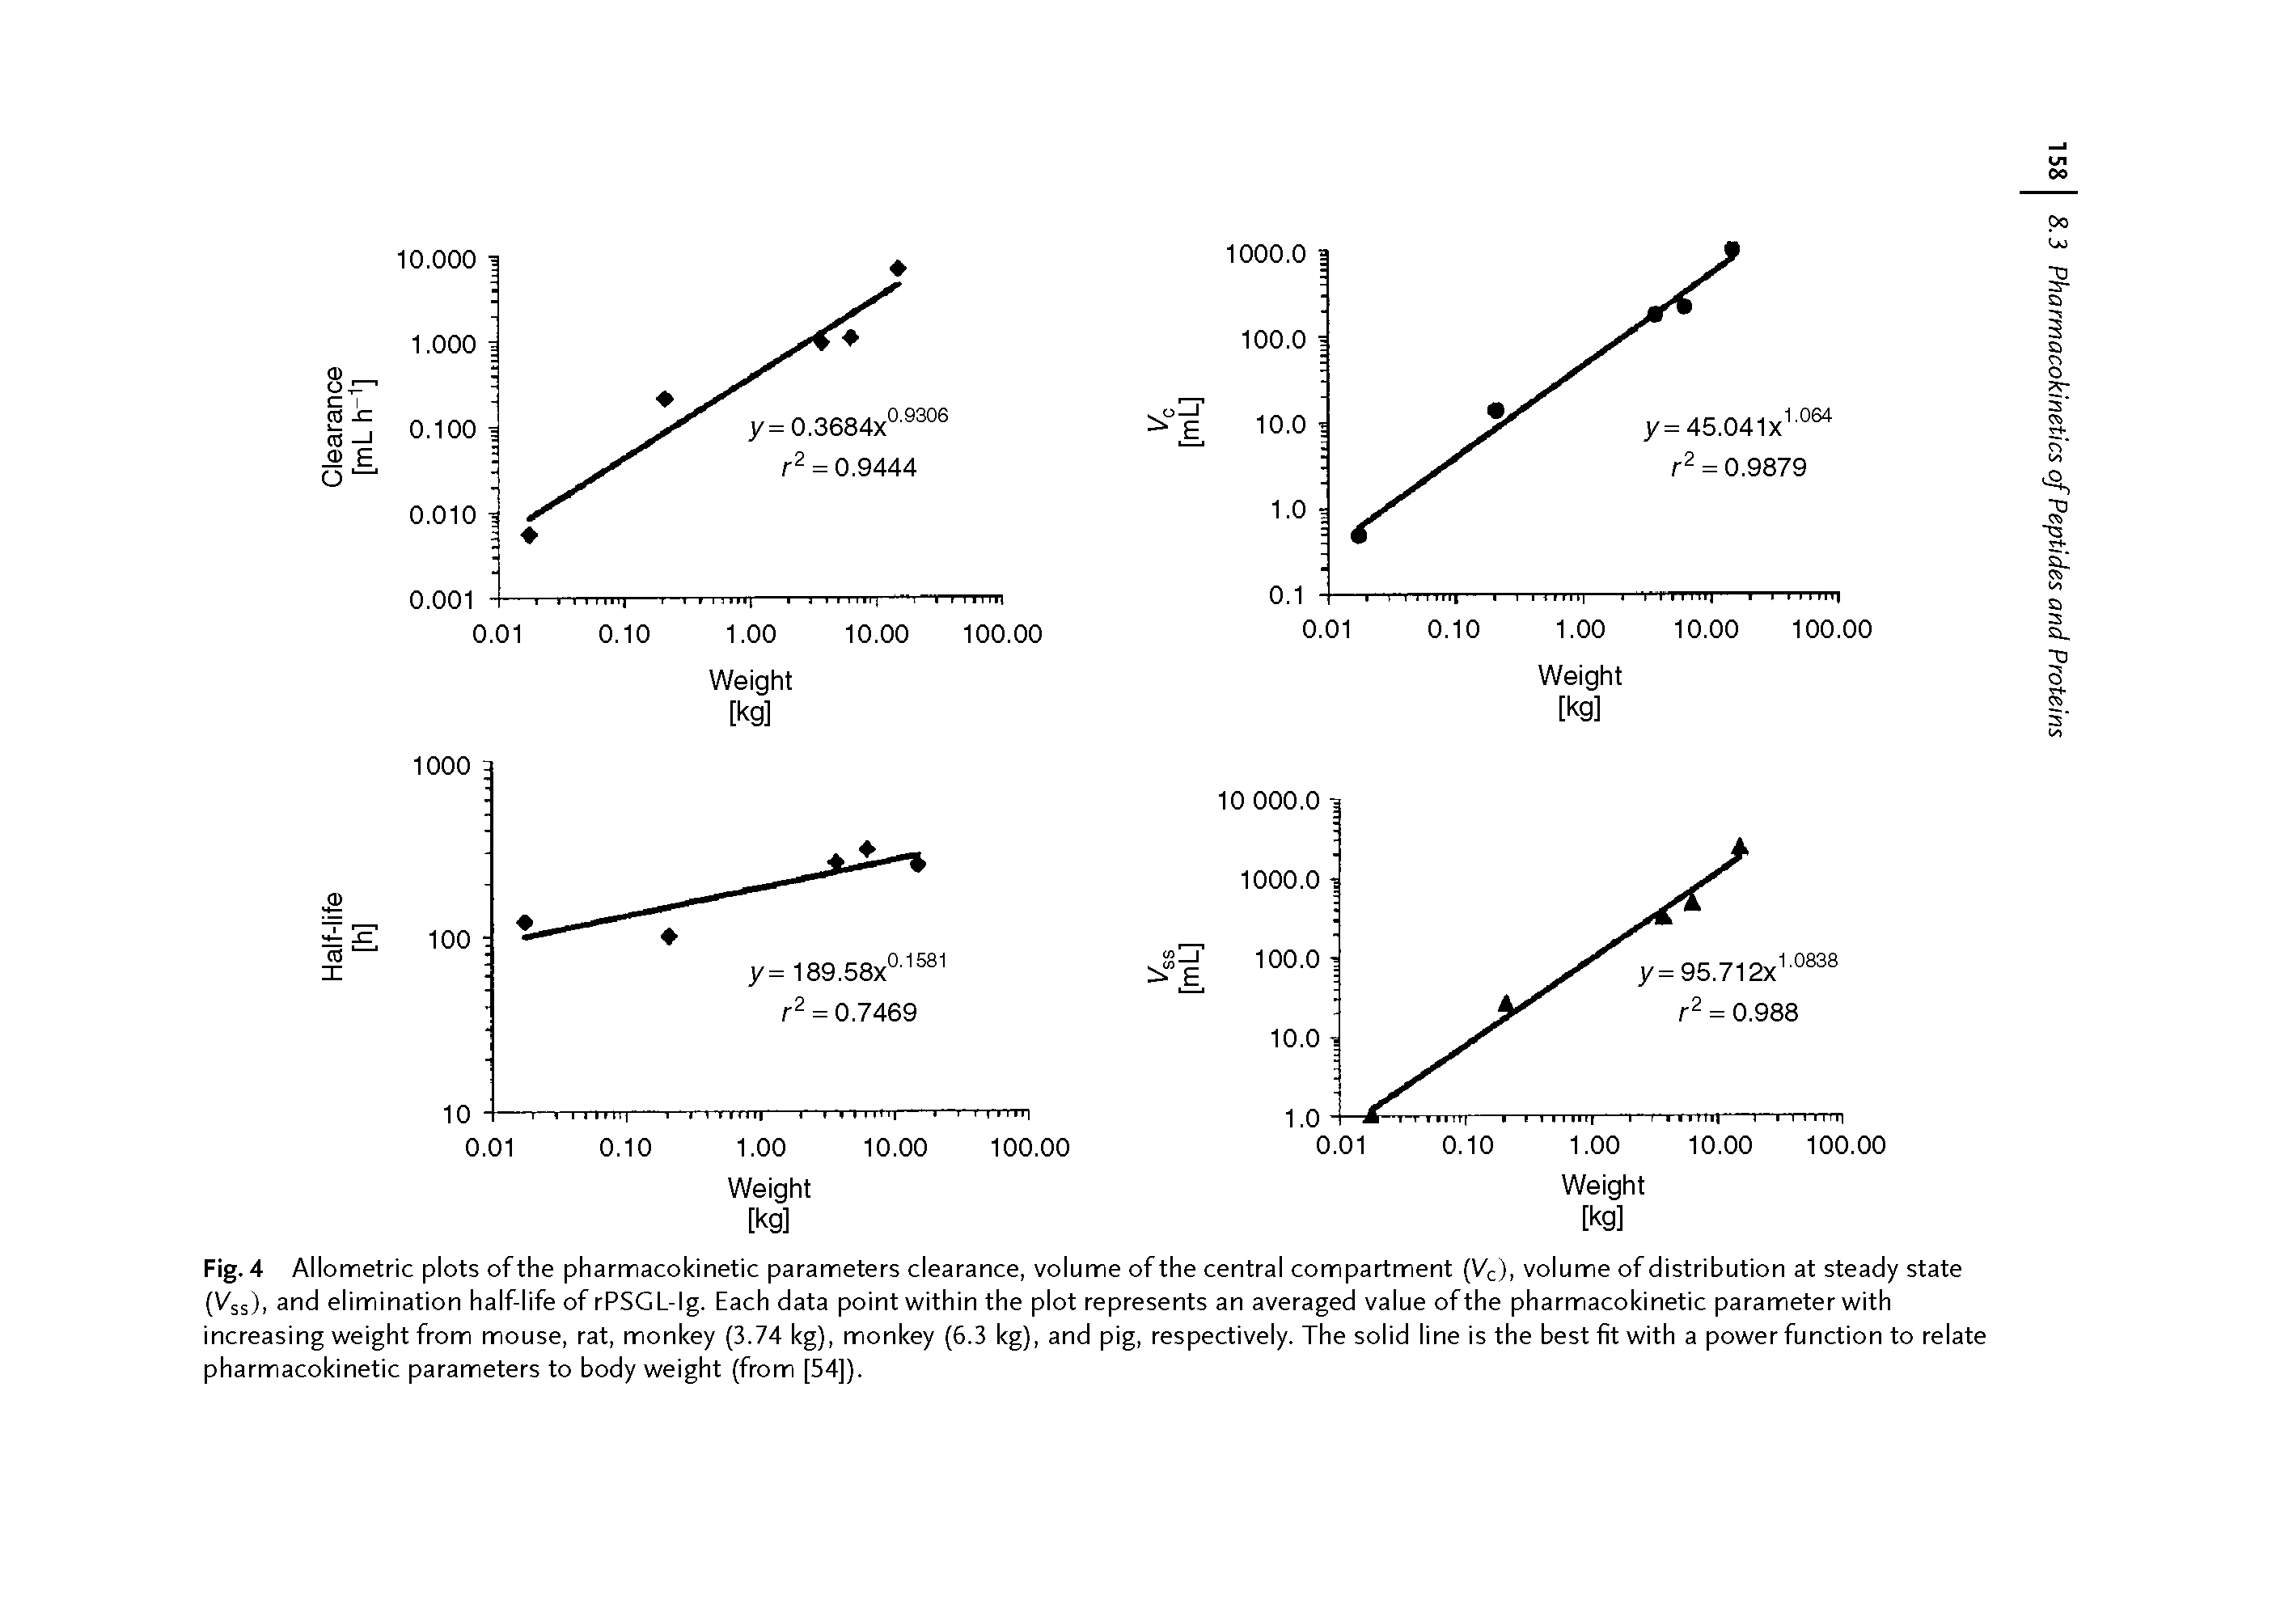 Fig. 4 Allometric plots of the pharmacokinetic parameters clearance, volume of the central compartment ( /c), volume of distribution at steady state Vss), and elimination half-life of rPSGL-lg. Each data point within the plot represents an averaged value ofthe pharmacokinetic parameter with increasing weight from mouse, rat, monkey (3.74 kg), monkey (6.3 kg), and pig, respectively. The solid line is the best fit with a power function to relate pharmacokinetic parameters to body weight (from [54]).